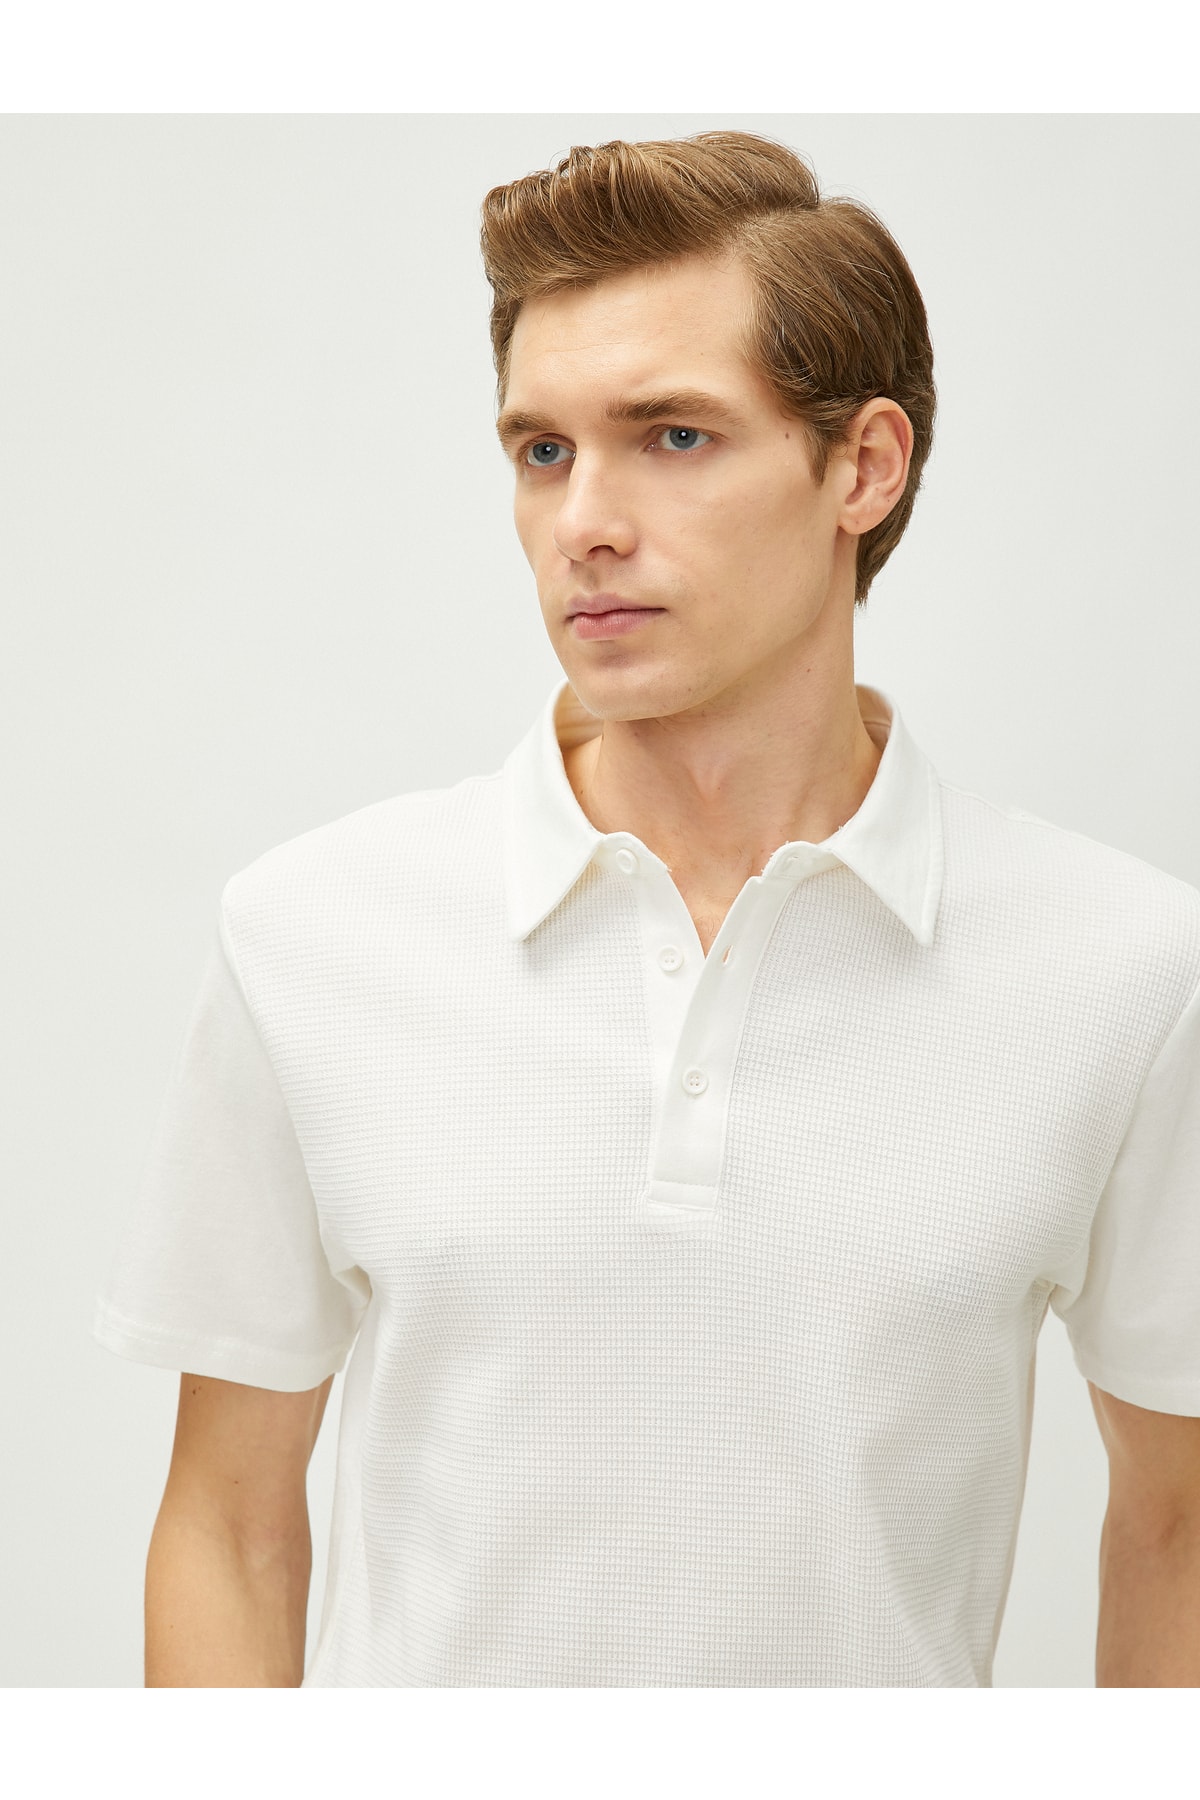 Koton Polo Neck T-Shirt with Textured Buttons, Slim Fit, Short Sleeves.